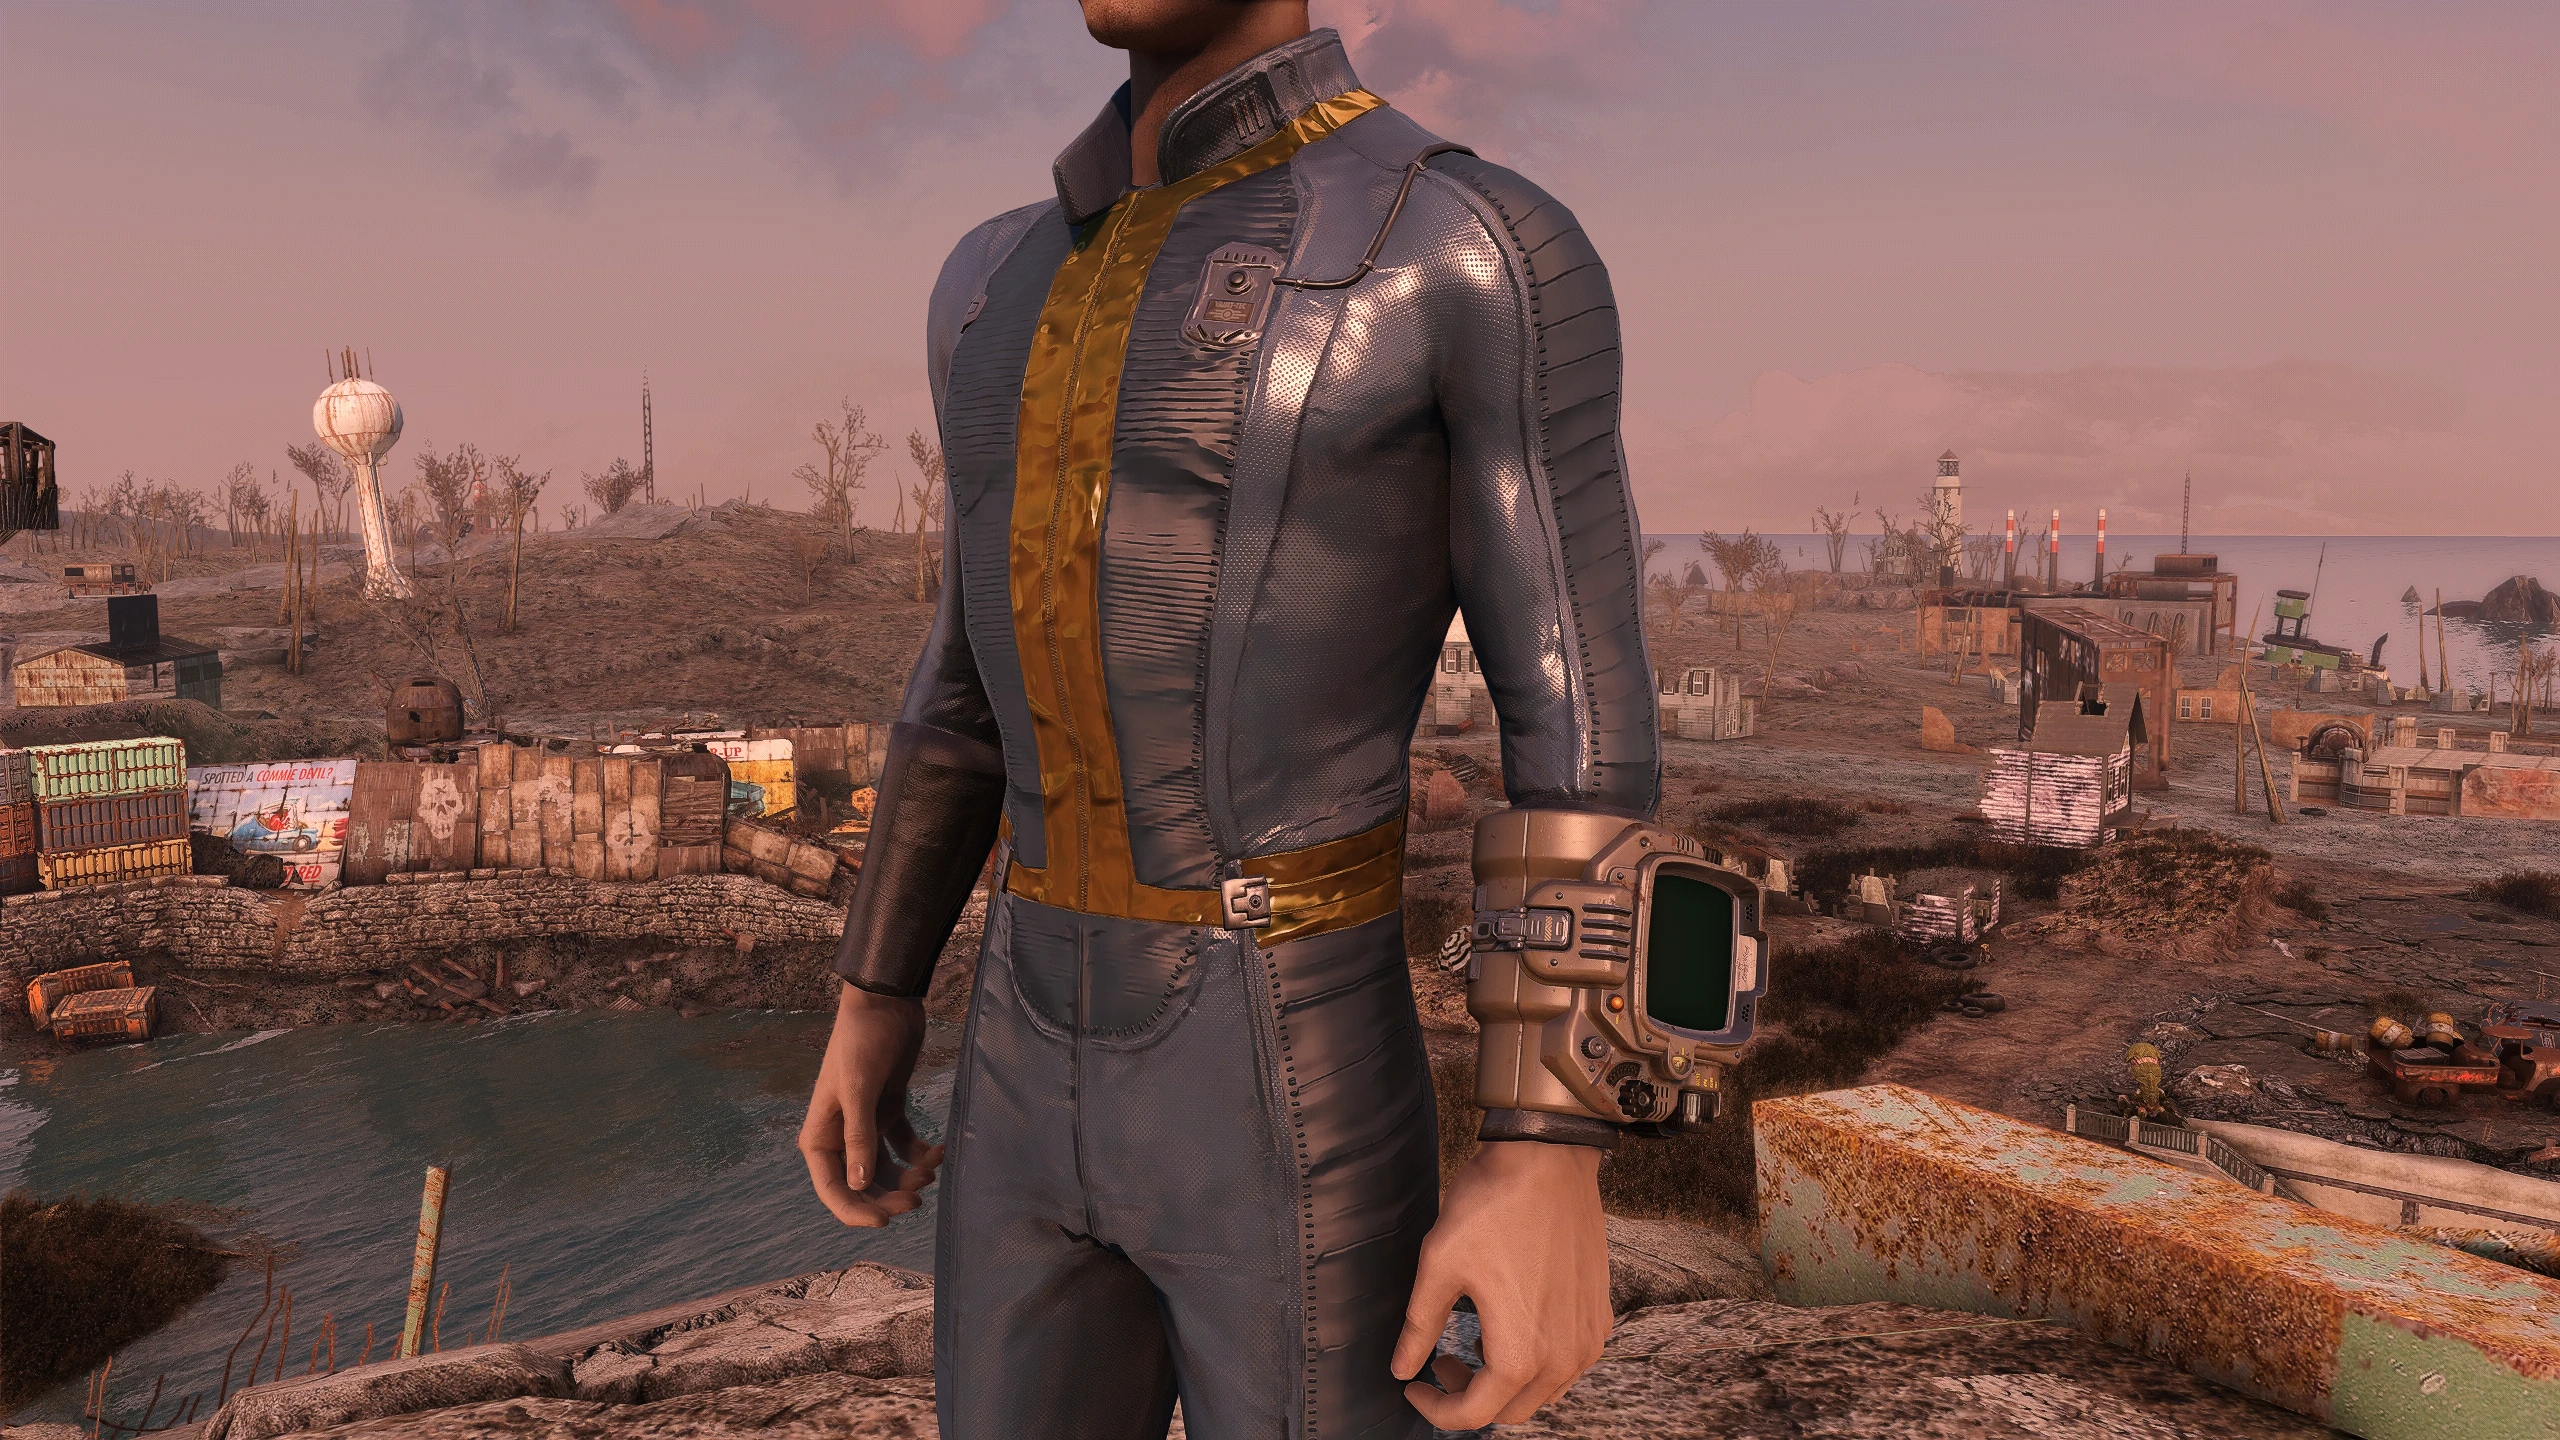 Build your own vault fallout 4 фото 98